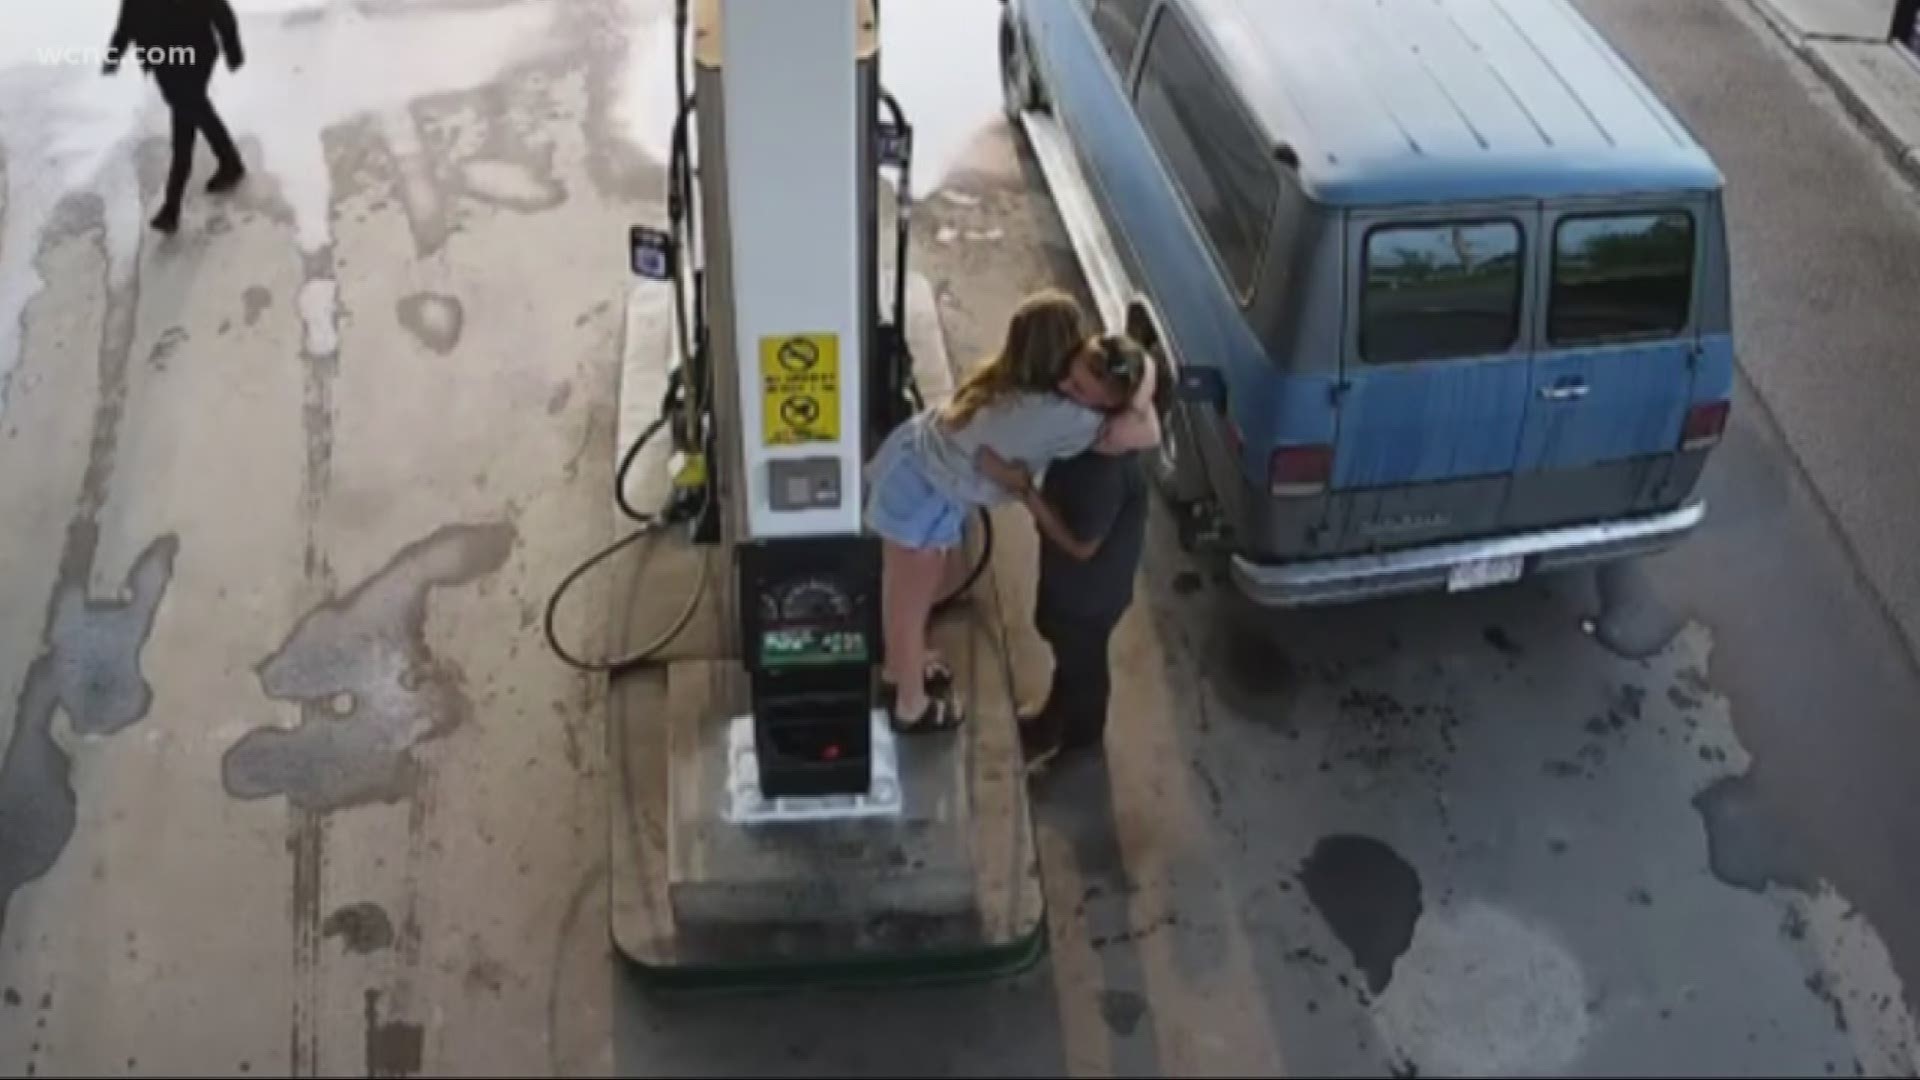 Investigators released brand new surveillance video of the couple gassing up their van. It's the last known sighting of the young couple.